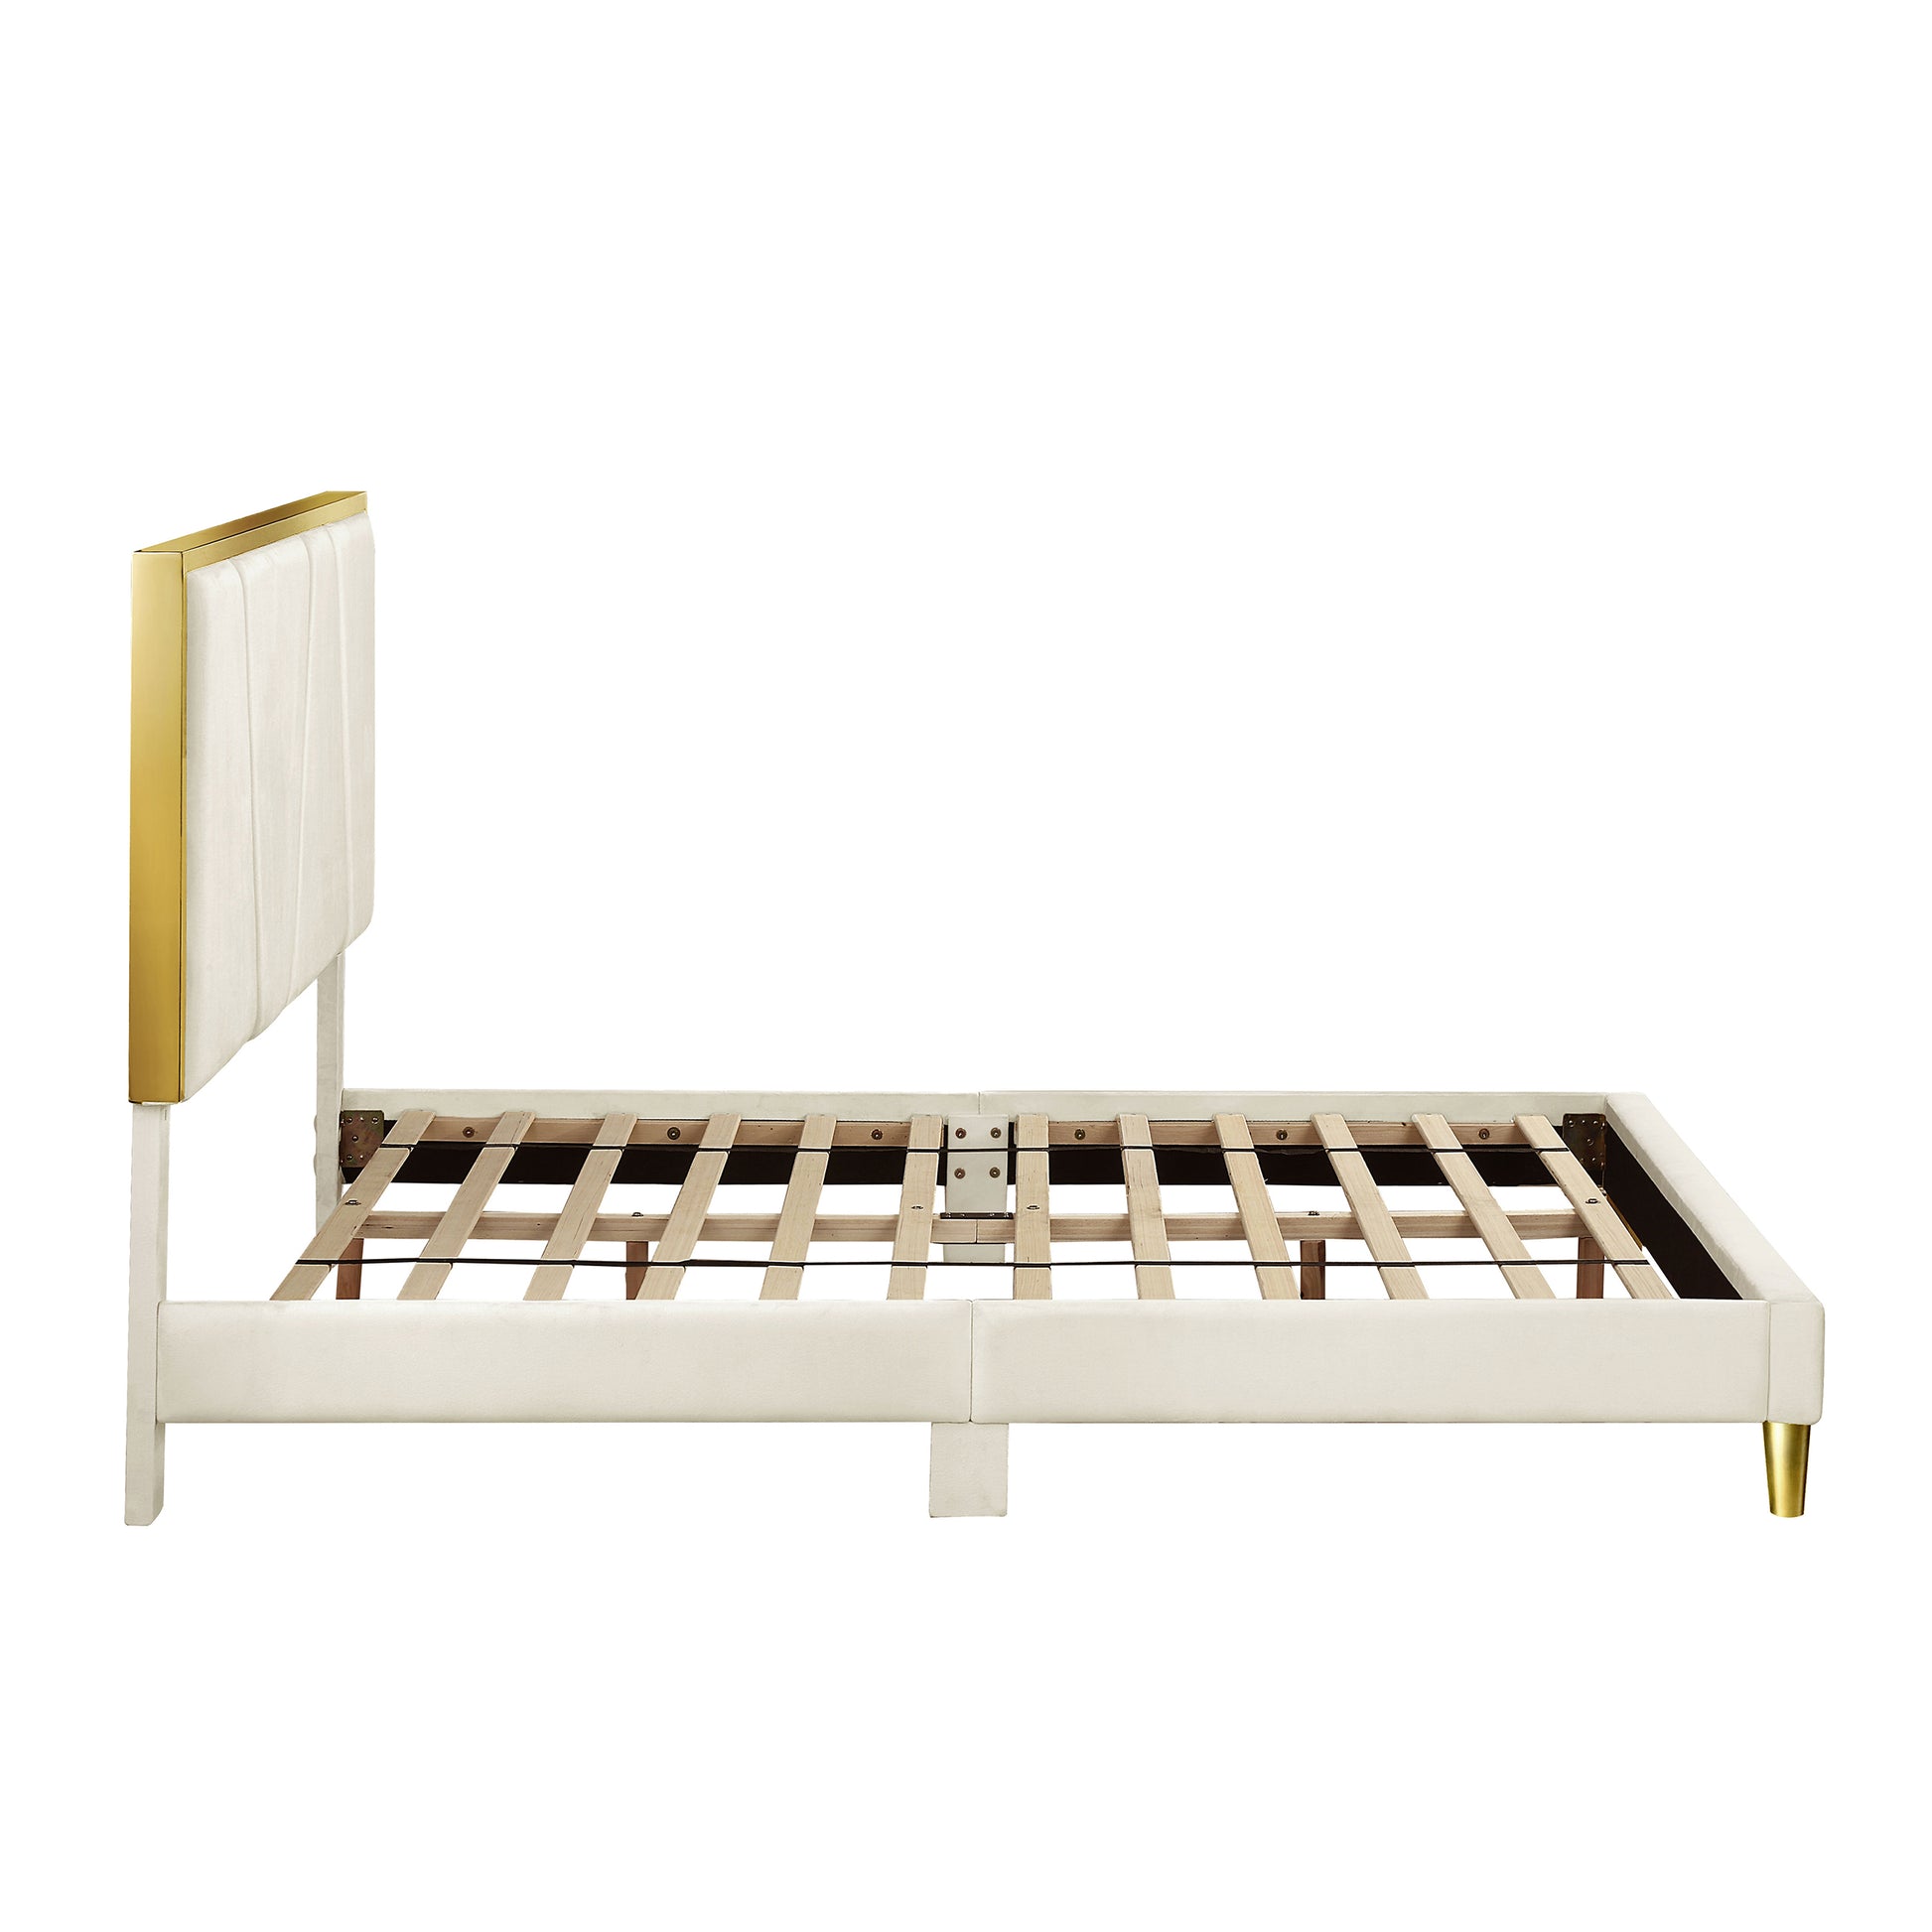 Front-facing side view of a contemporary beige and gold upholstered eastern king bed with slats shown on a white background